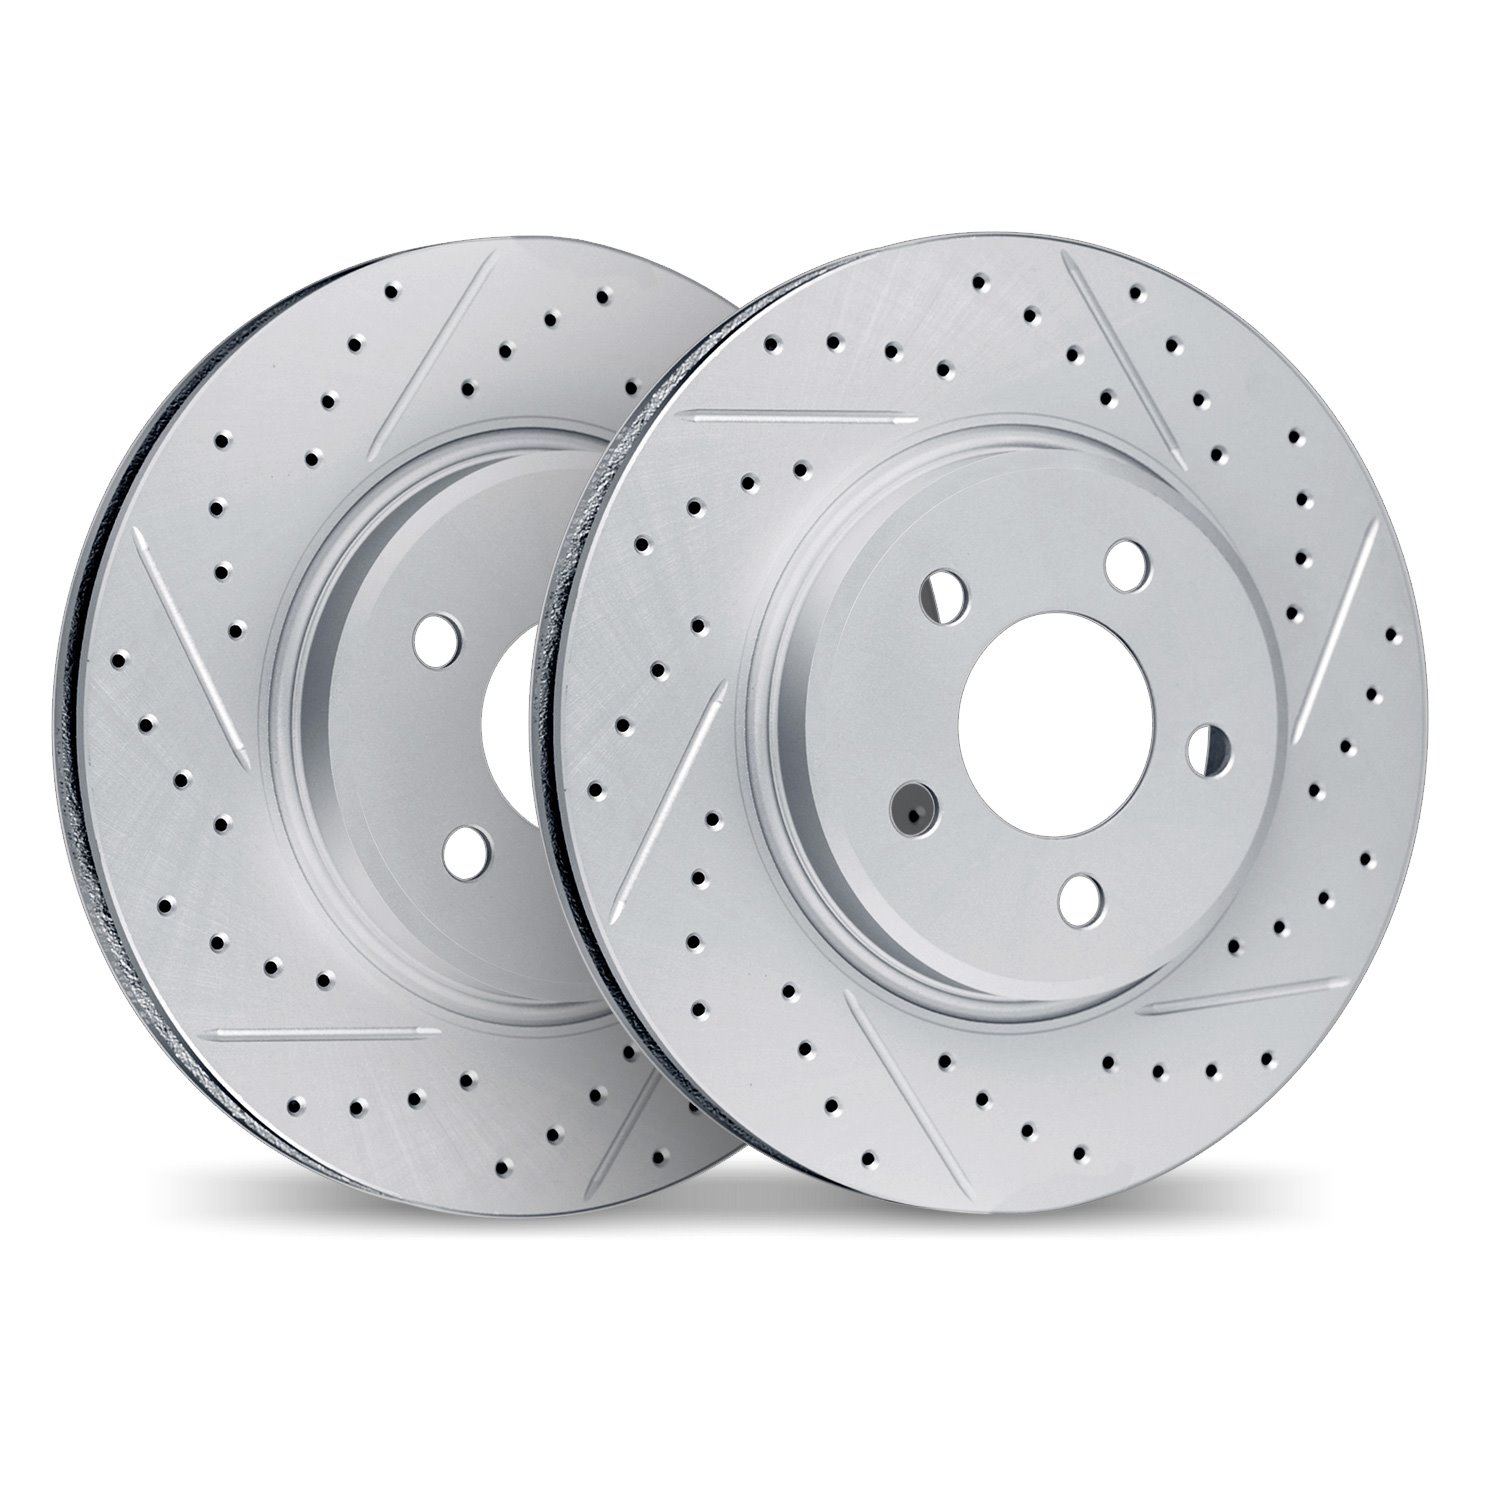 2002-58008 Geoperformance Drilled/Slotted Brake Rotors, 2014-2020 Acura/Honda, Position: Front